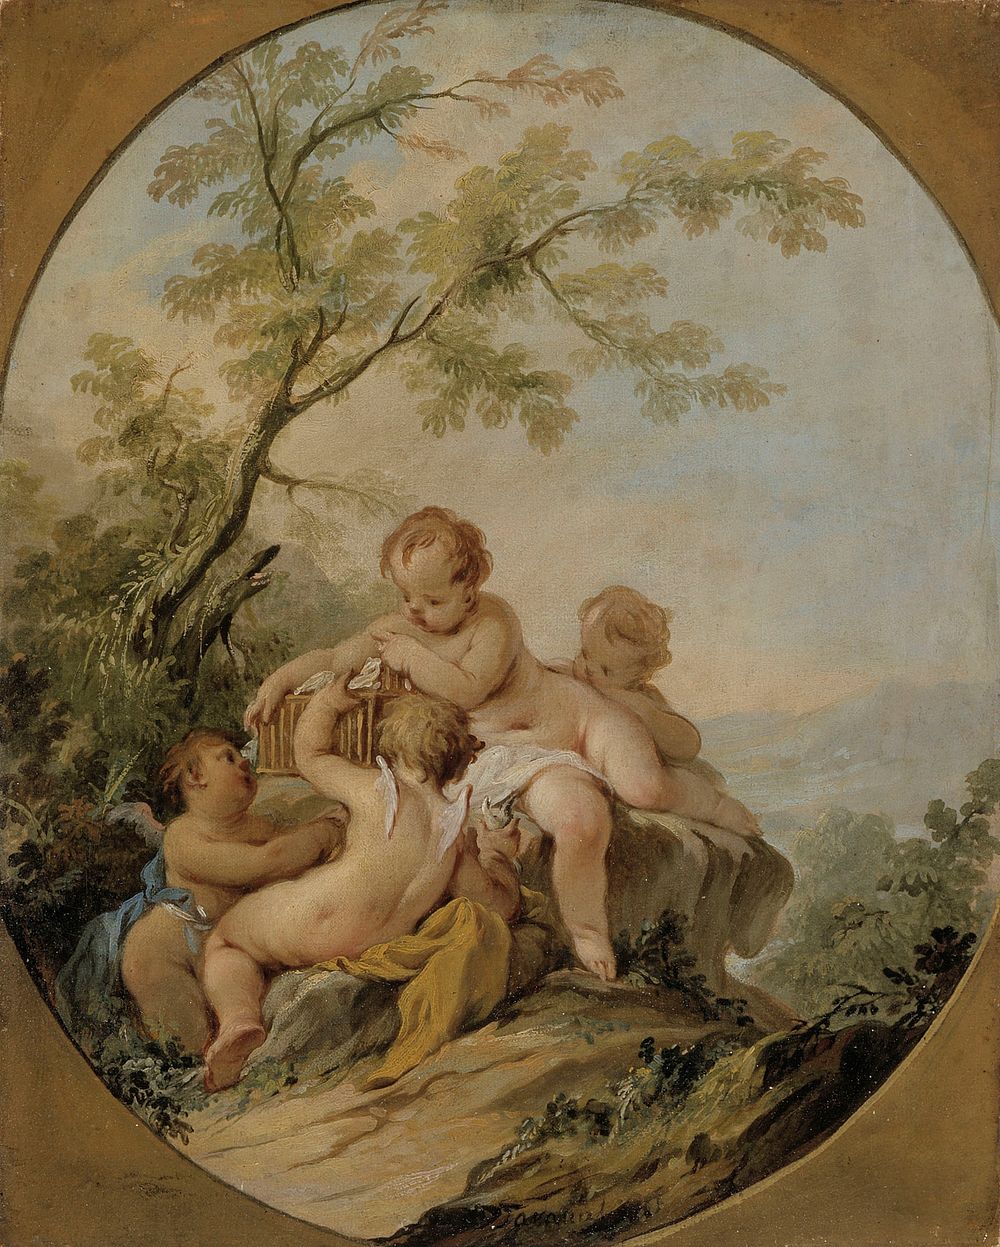 Four amorins playing with a birdcage, 1721 - 1750, Guillaume Taraval